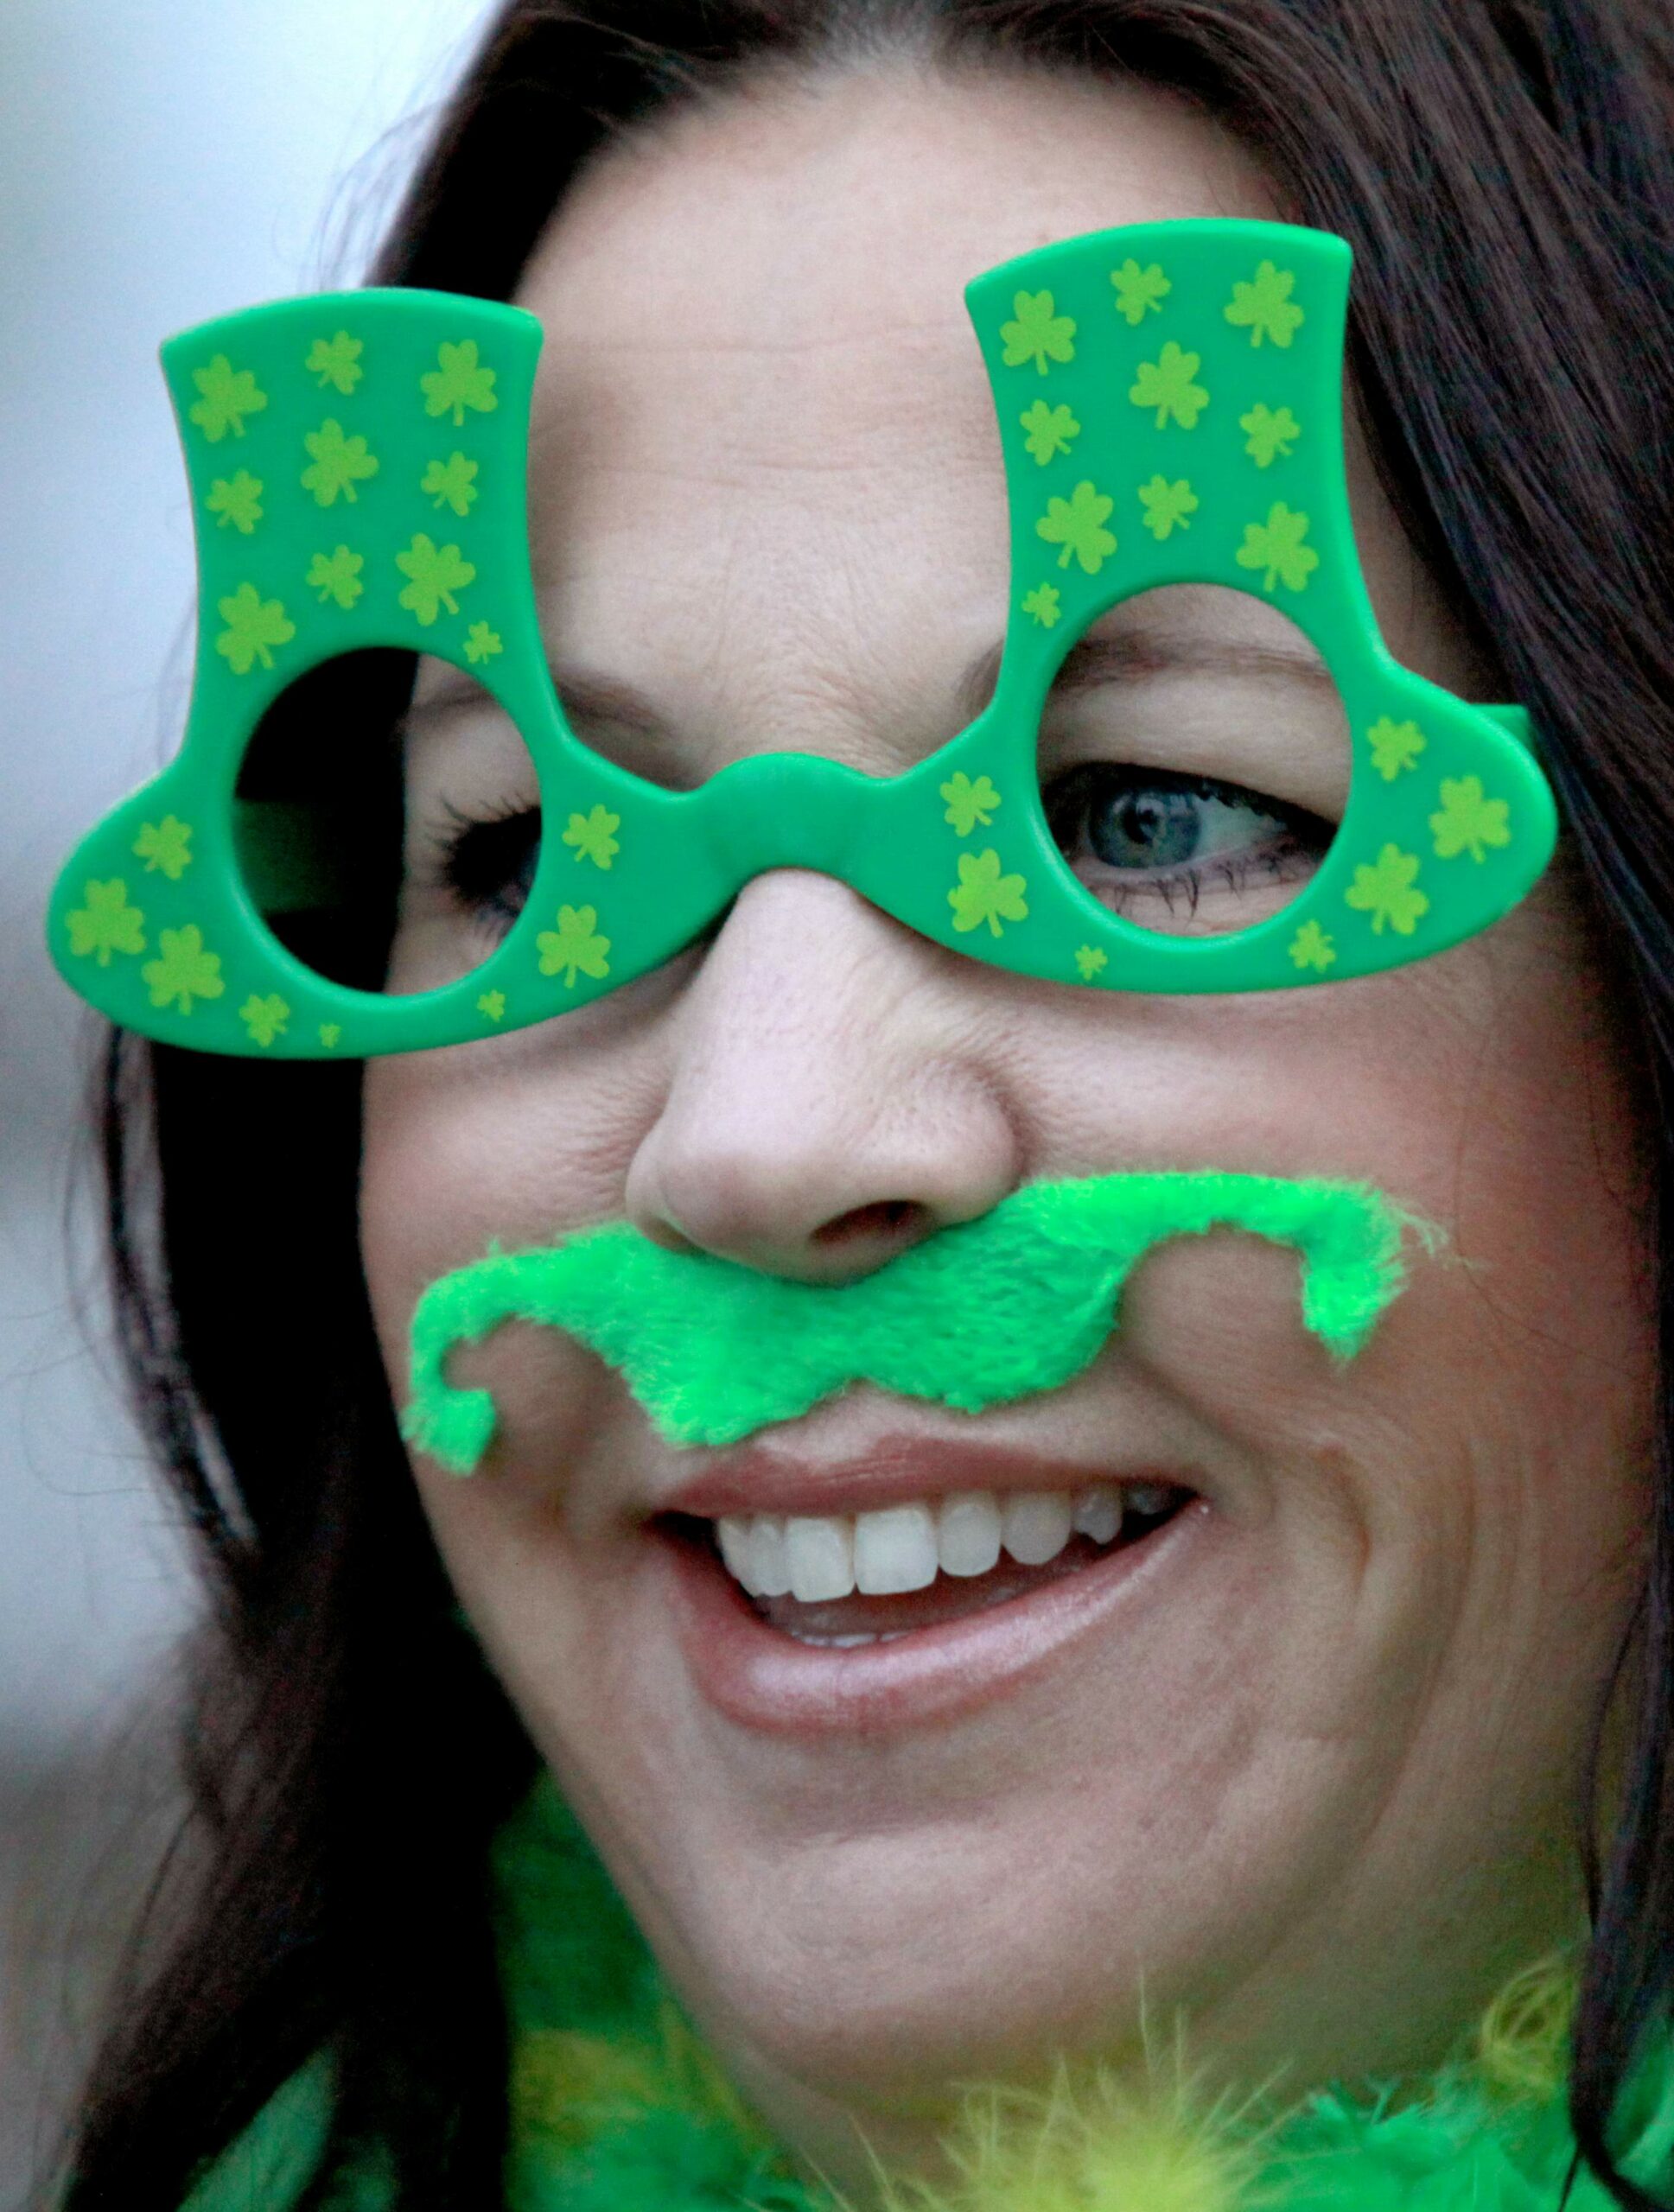 Leanna Lindsay takes part in the St. Patrick's Day parade in Healdsburg, on Tuesday, March 17, 2015. (BETH SCHLANKER/ The Press Democrat)